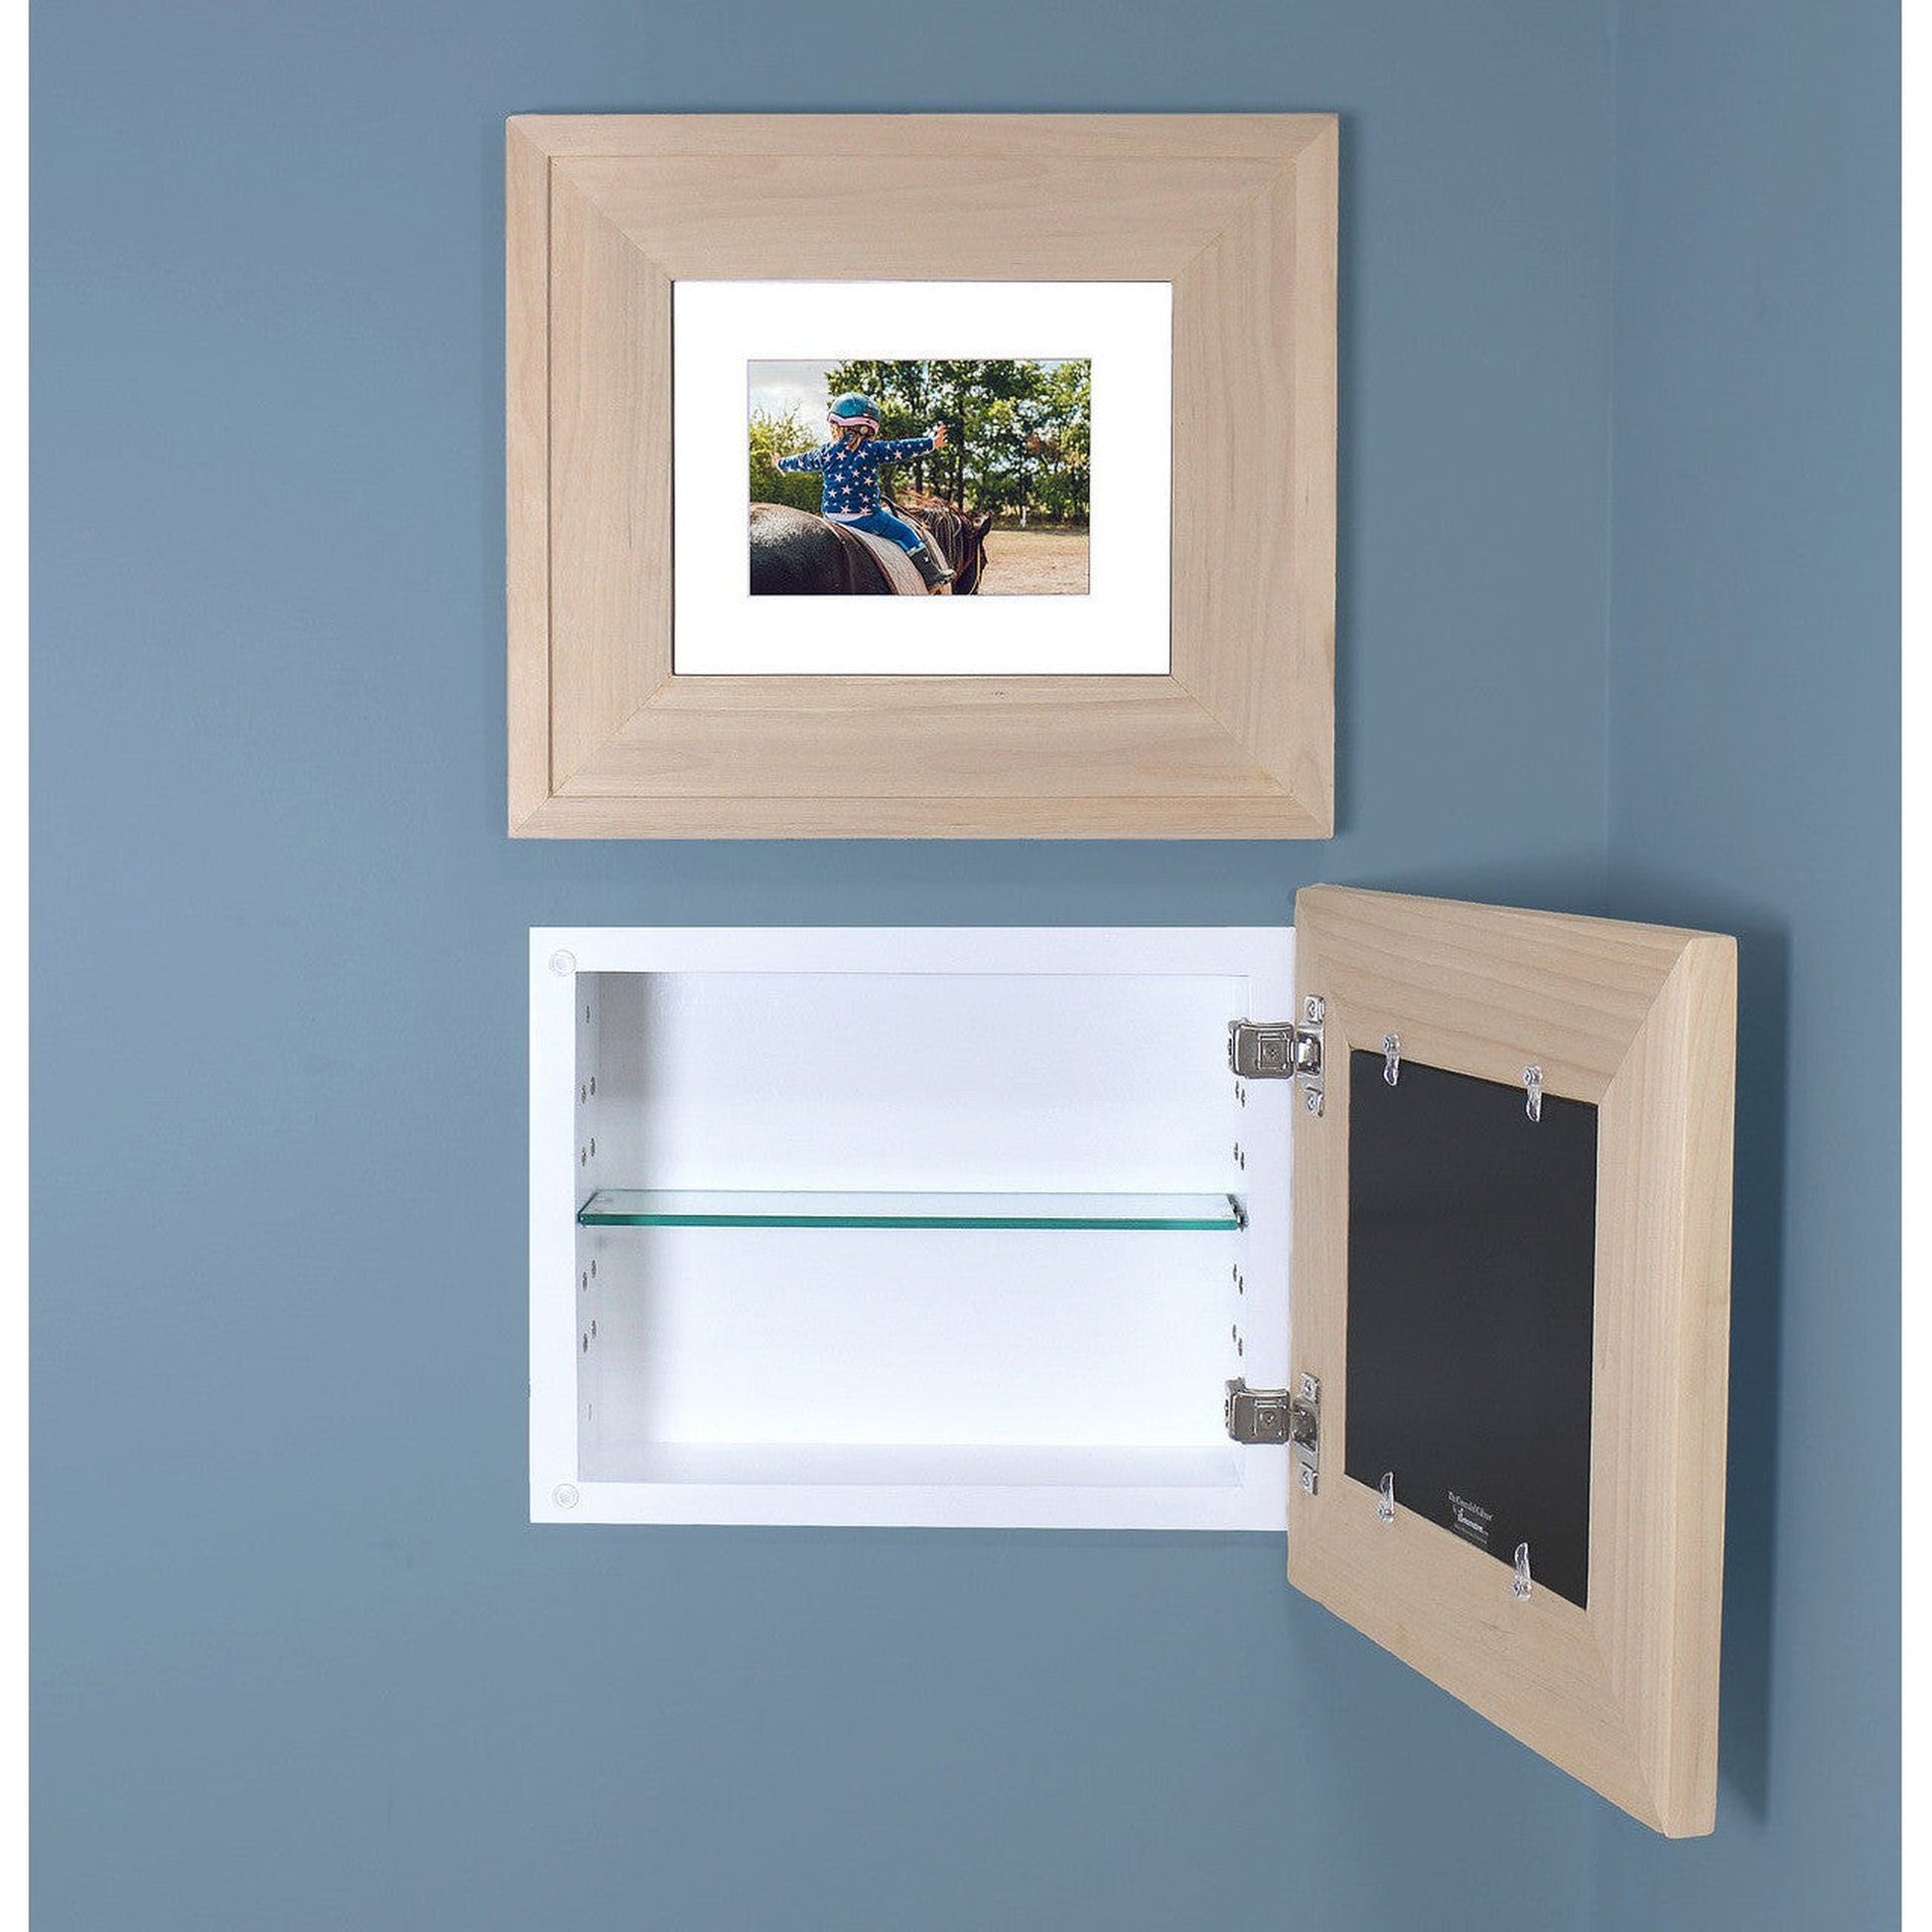 Fox Hollow Furnishings 14" x 11" Unfinished Raised Edge Compact Landscape Special 6" Depth Recessed Picture Frame Medicine Cabinet